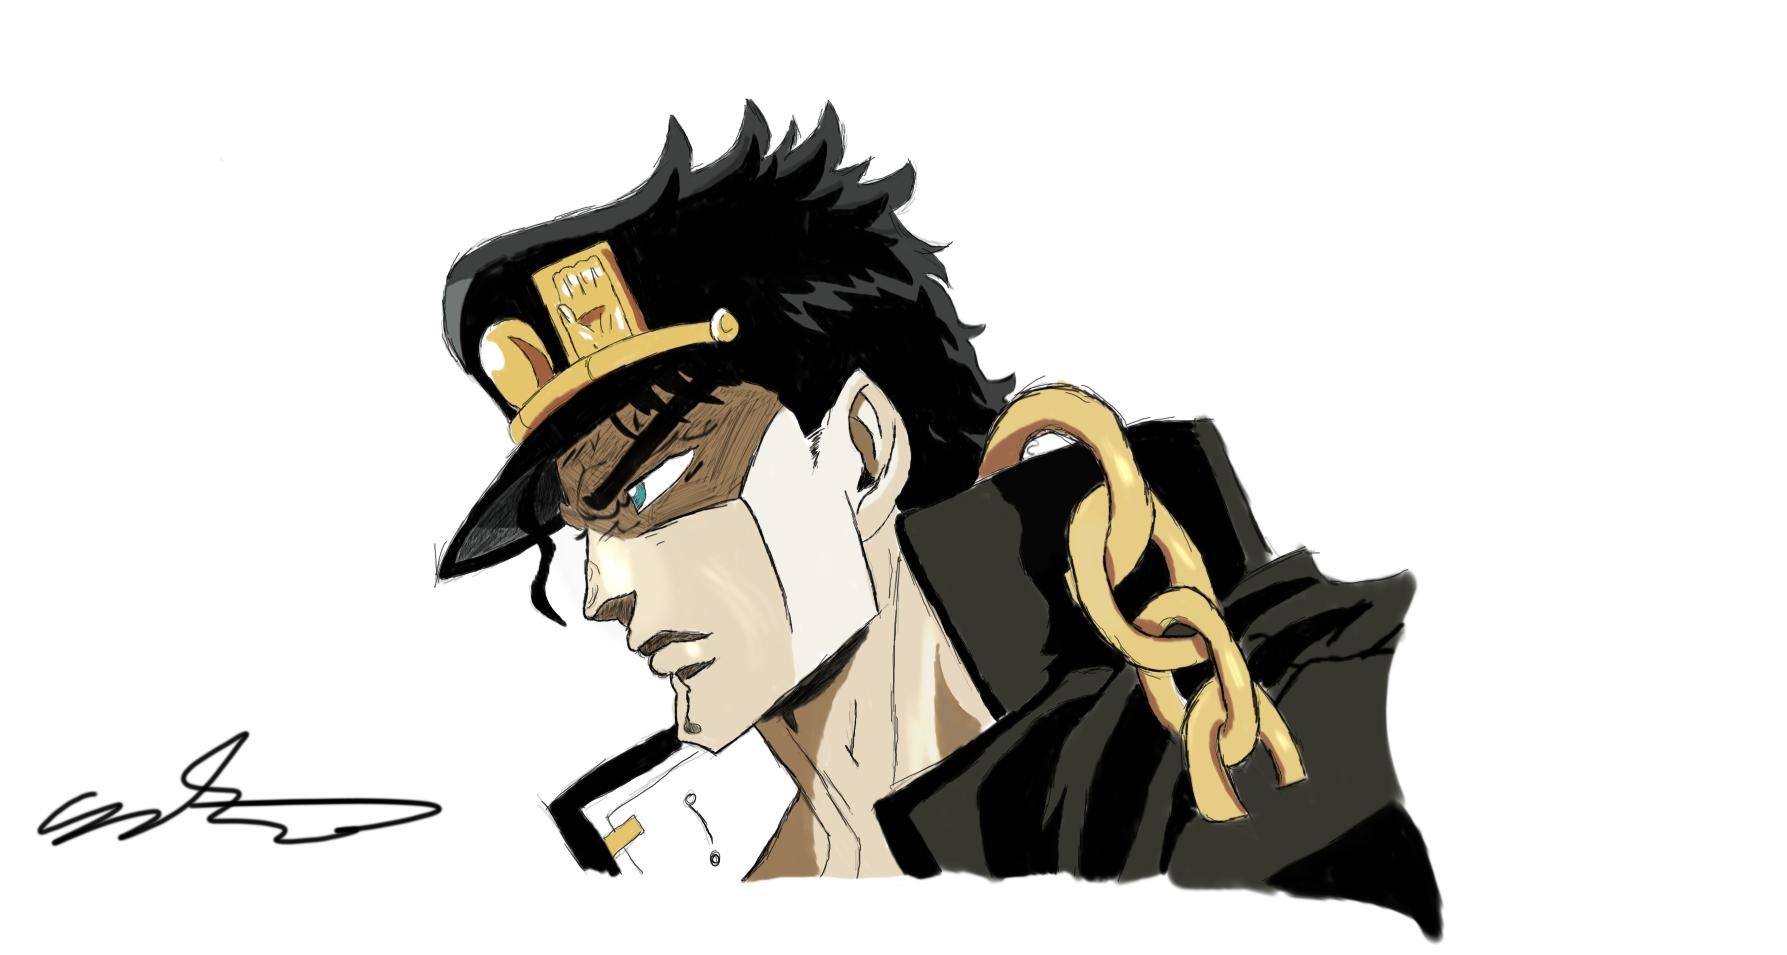 [REFERENCED USED - https://www.anime-planet.com/characters/jotaro-kujo] .